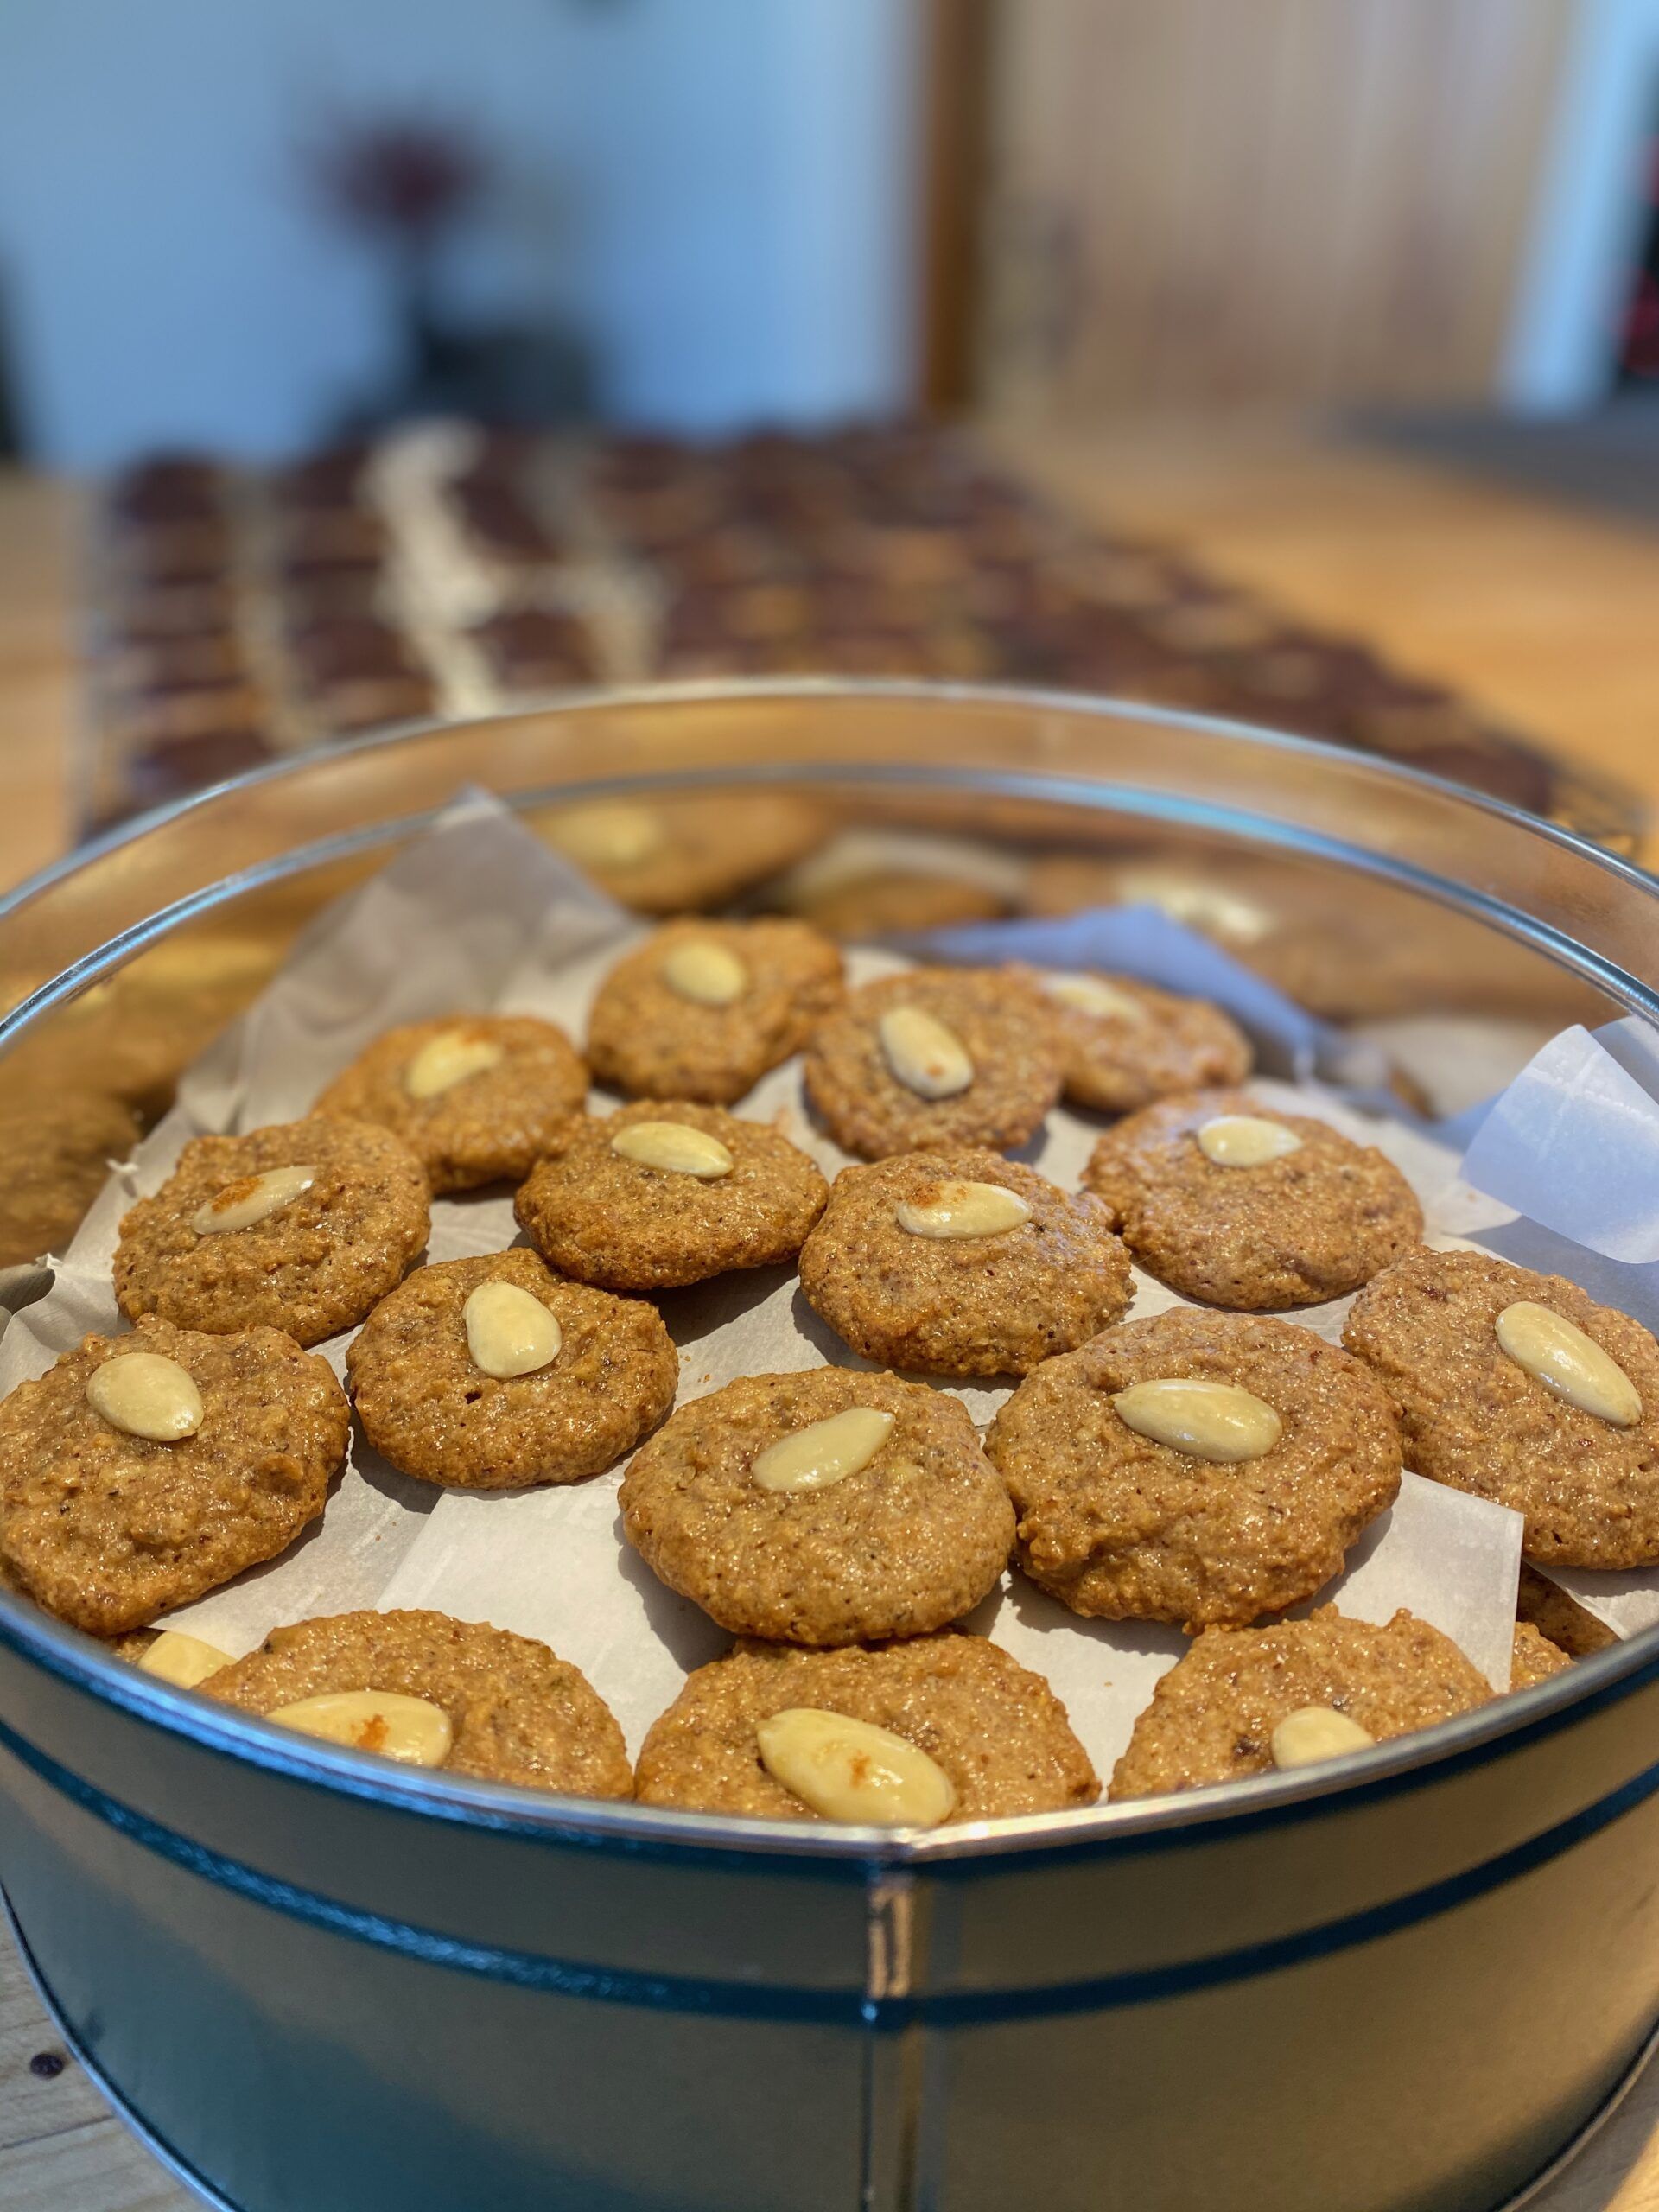 A tin of round golden cookies with an almond in the center of each. A tray of chocolate-covered cookies is blurred out in the background.